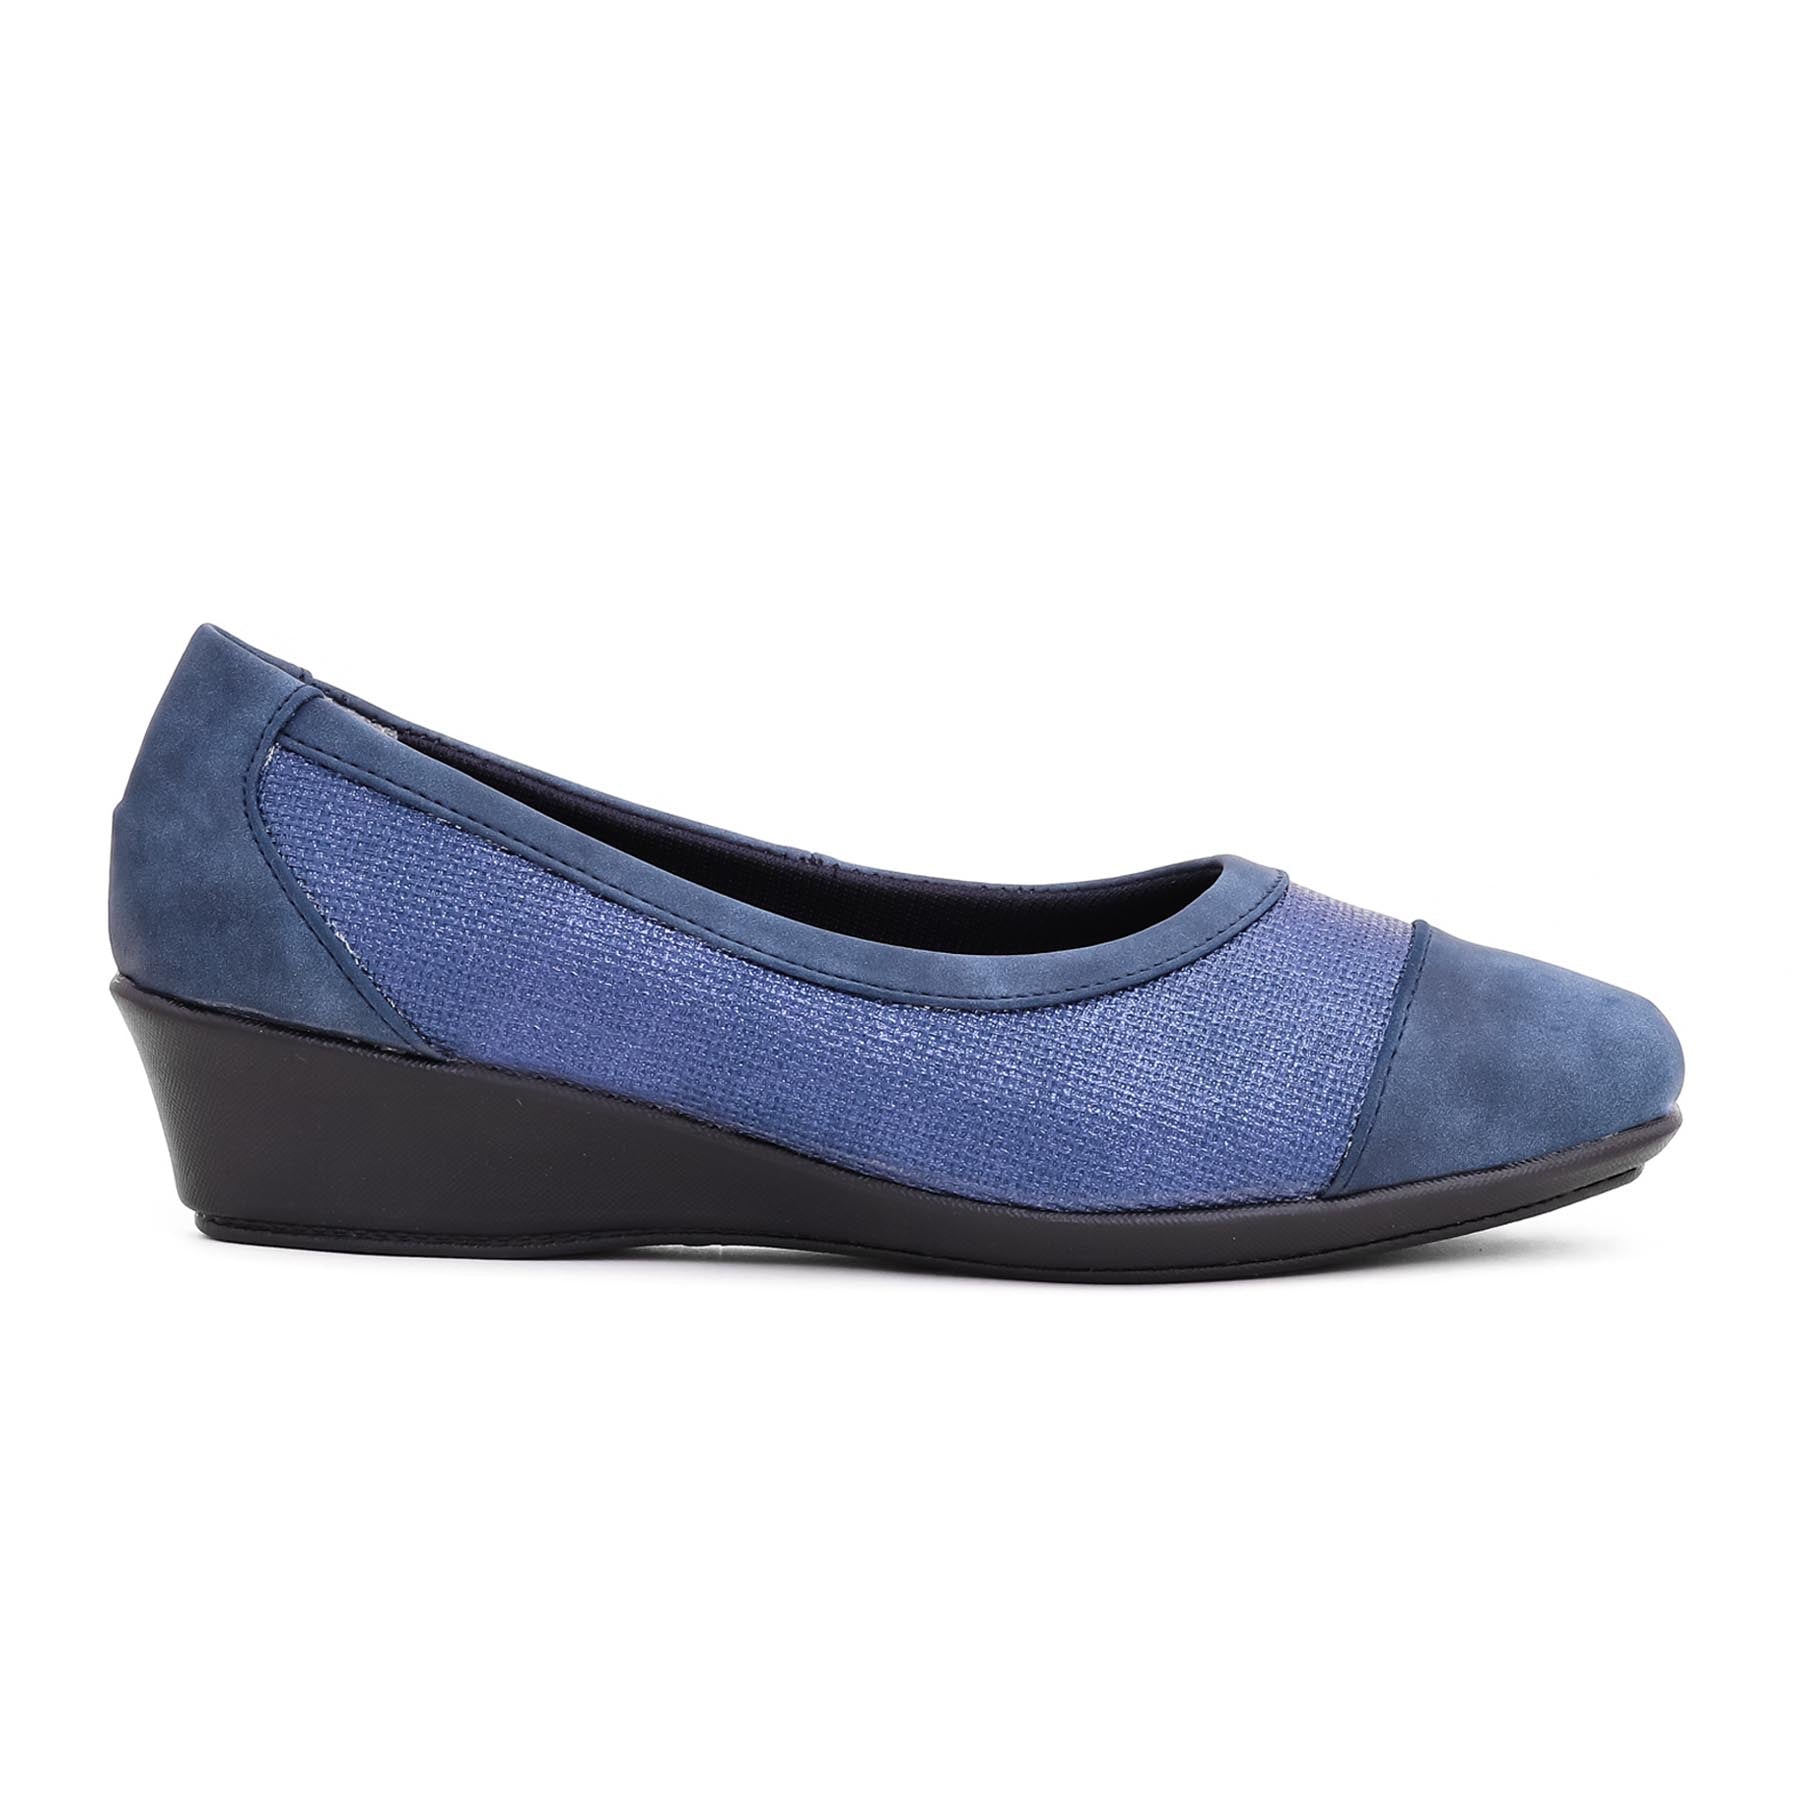 Blue Moccasin WN4261